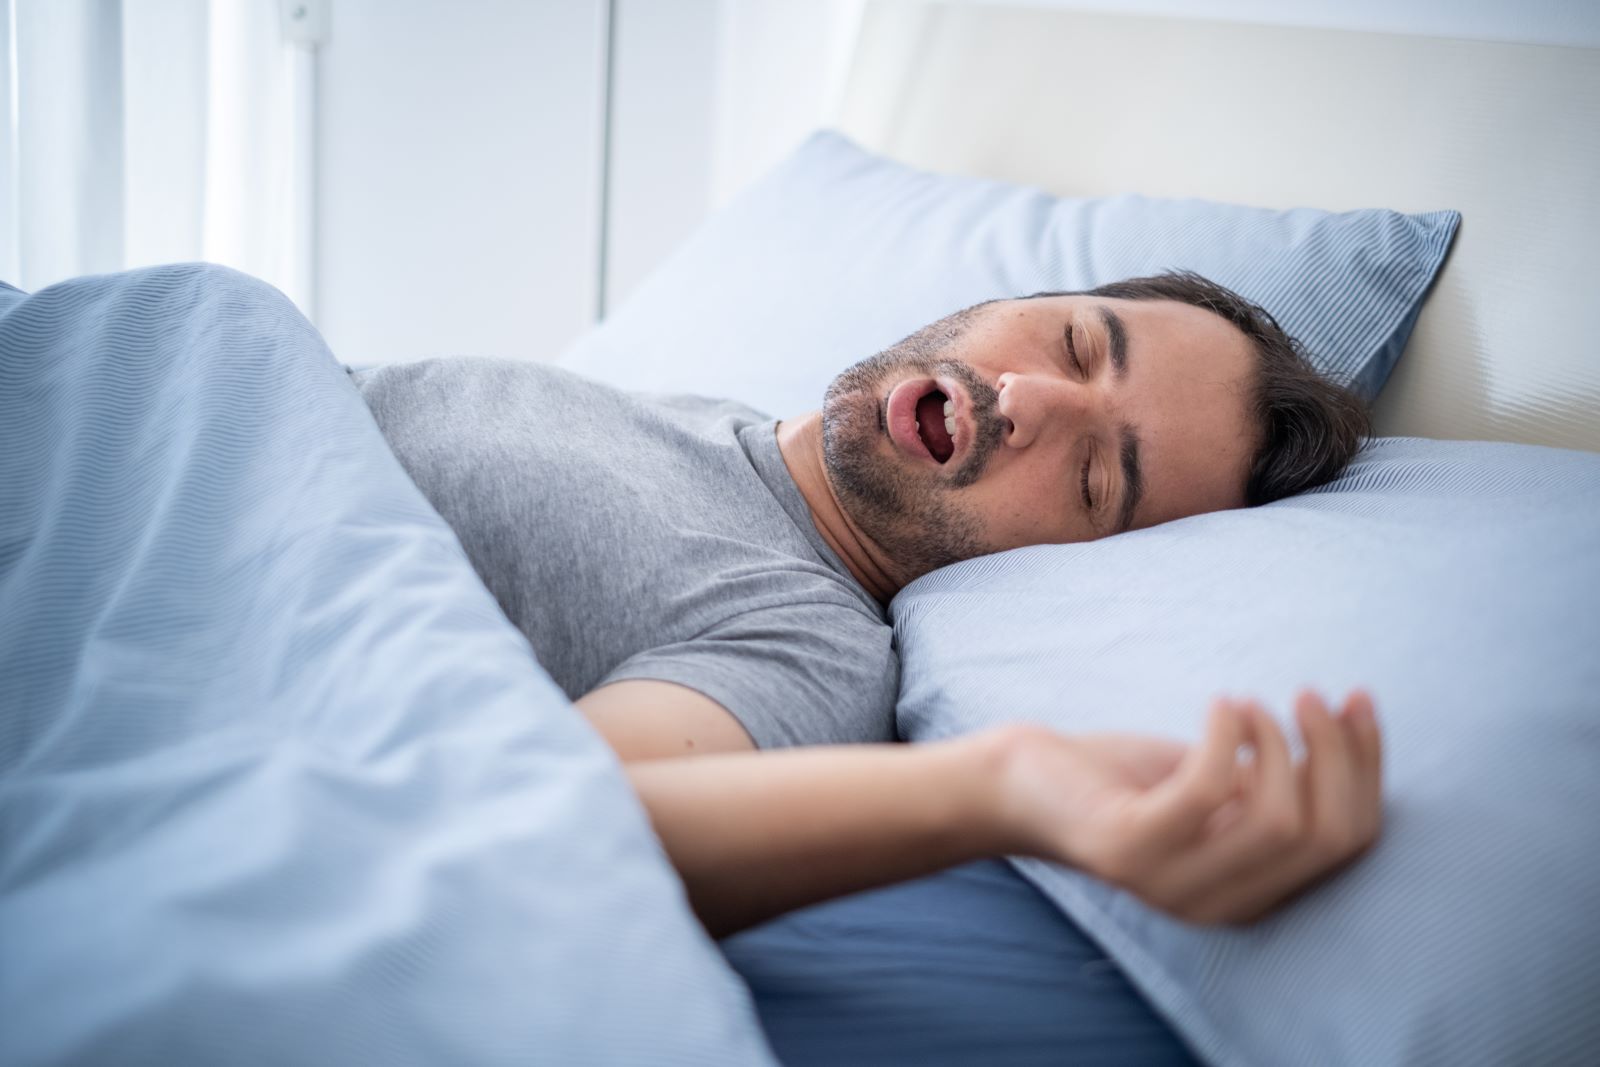 5 Simple Fixes for Snoring From a Pulmonologist